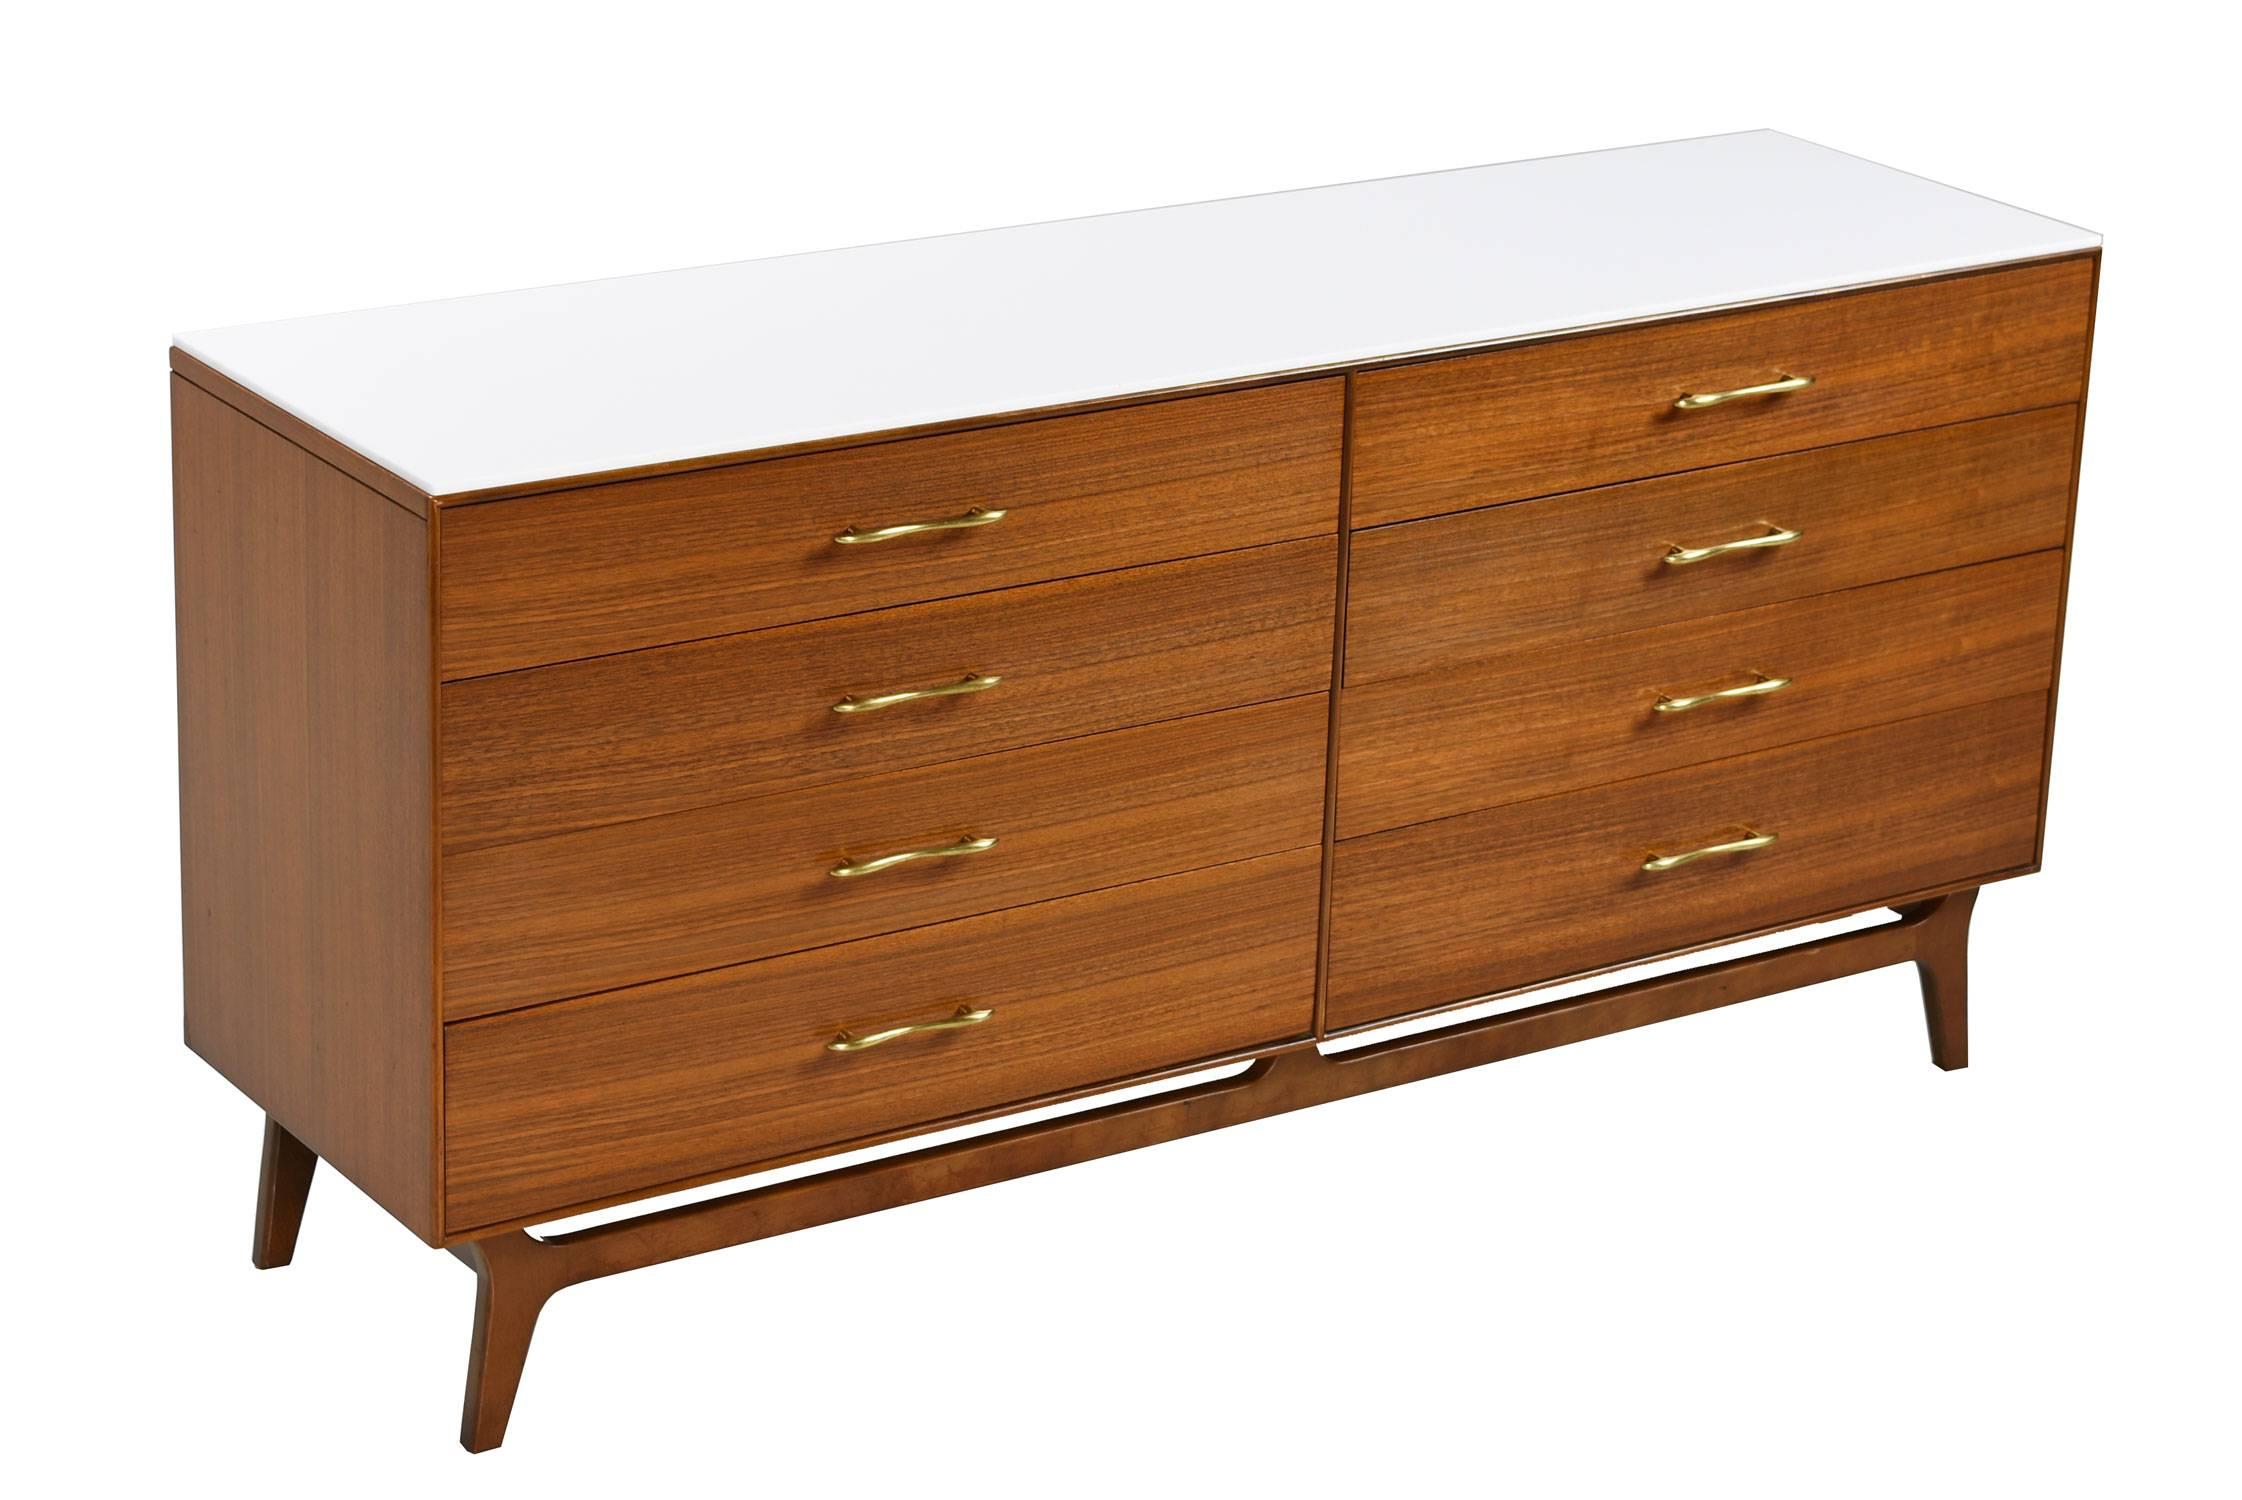 This Mid-Century Modern eight-drawer dresser by RWAY features expert craftsmanship and spectacular walnut wood. The dresser comes with a piece of polished white stone to accent and protect the top surface. Place perfume bottles, drinks and